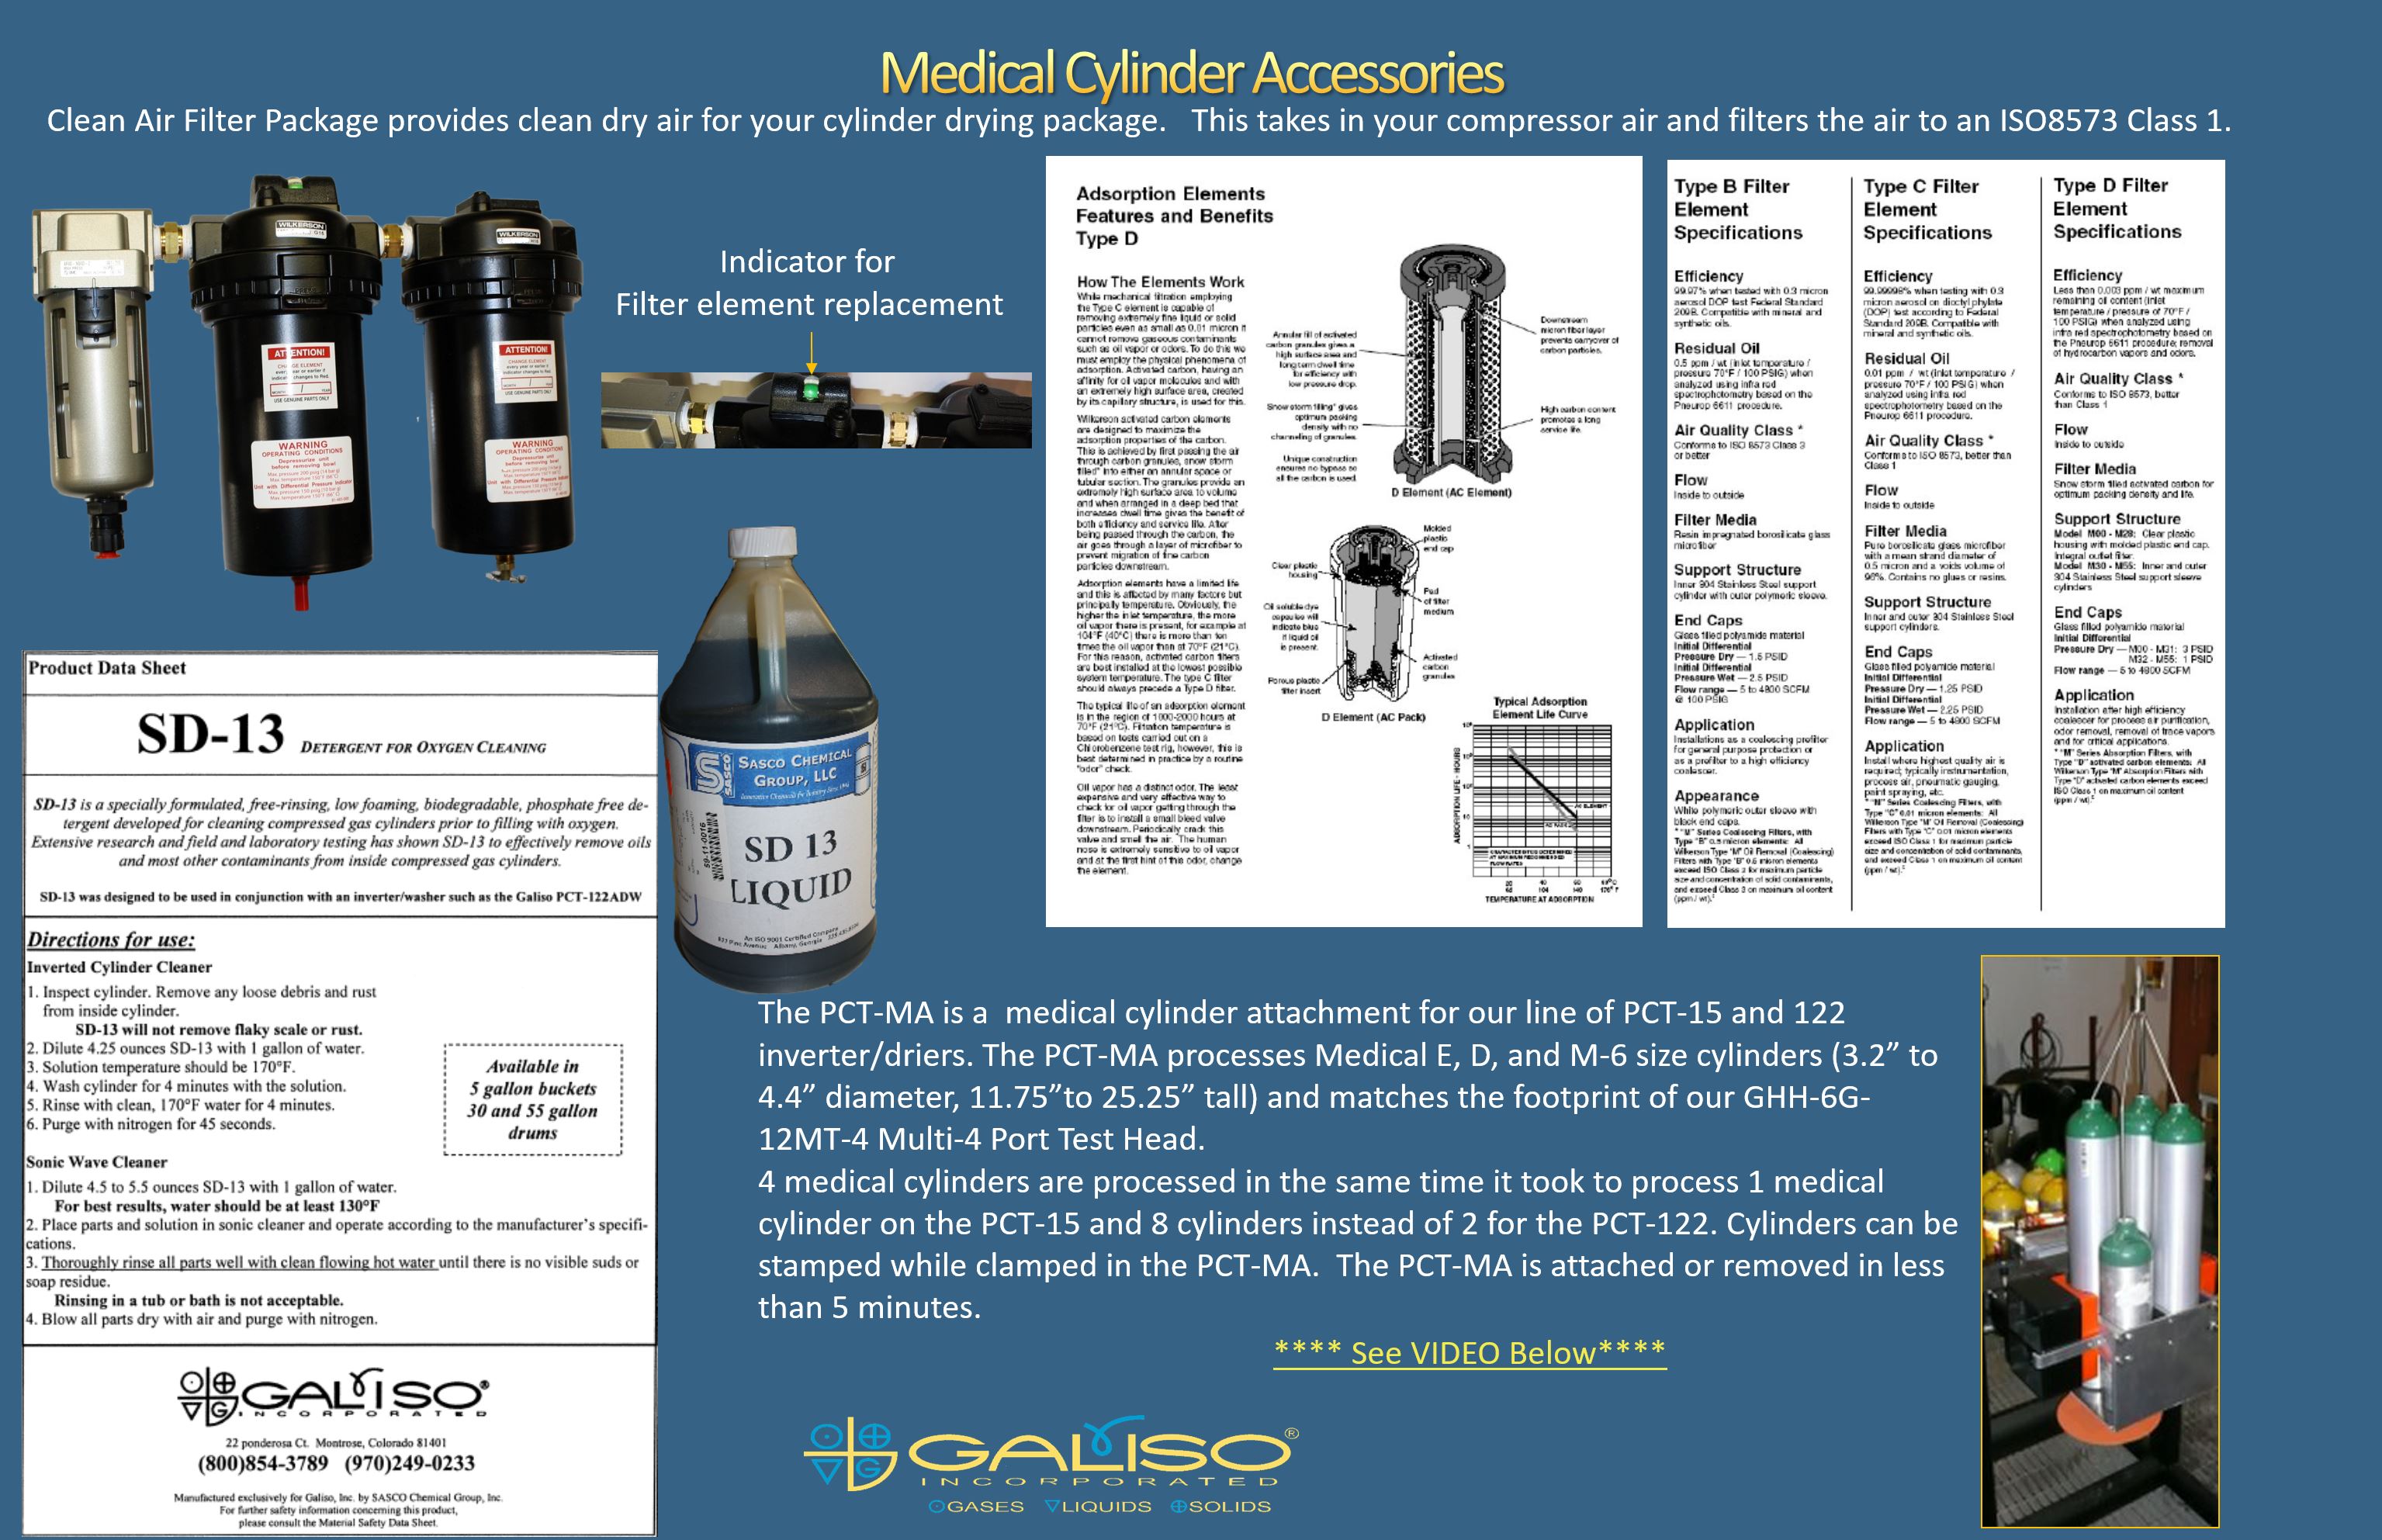 Galiso Medical Cylinder Accessories for Hydrostatic Test Systems